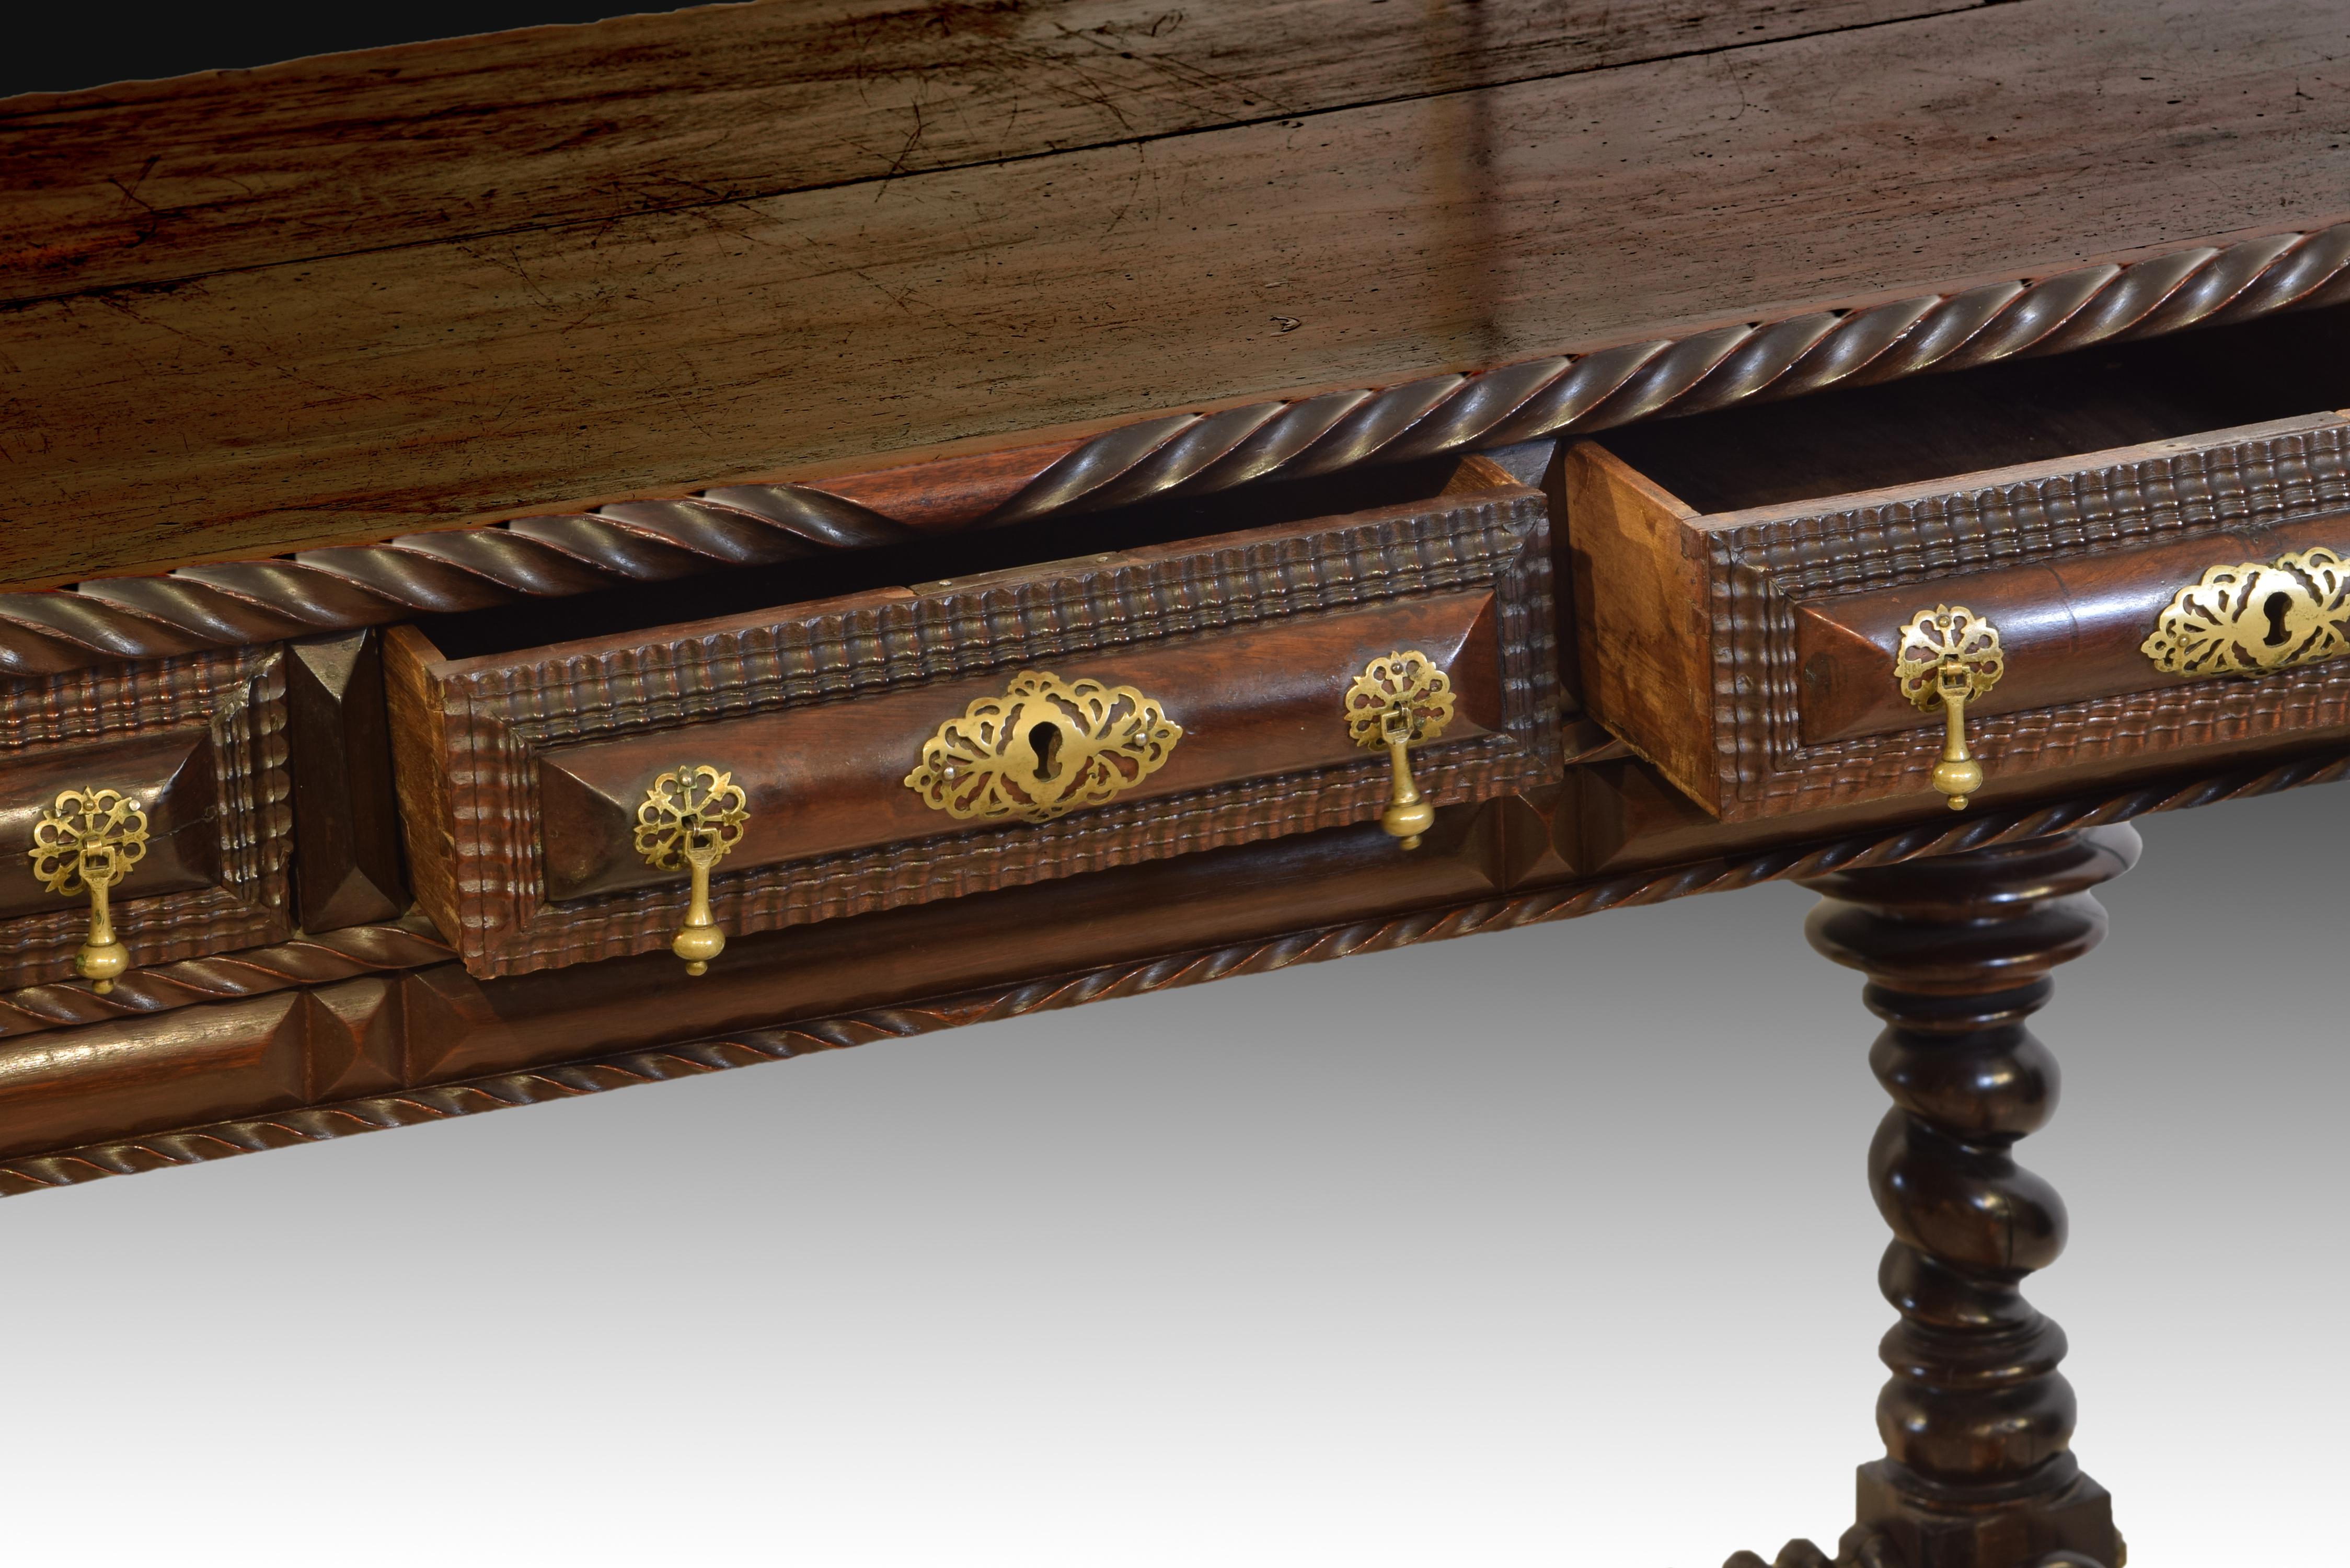 European Table, Palosanto 'Rose Wood or Holy Wood', Portuguese School, 18th and 19th C